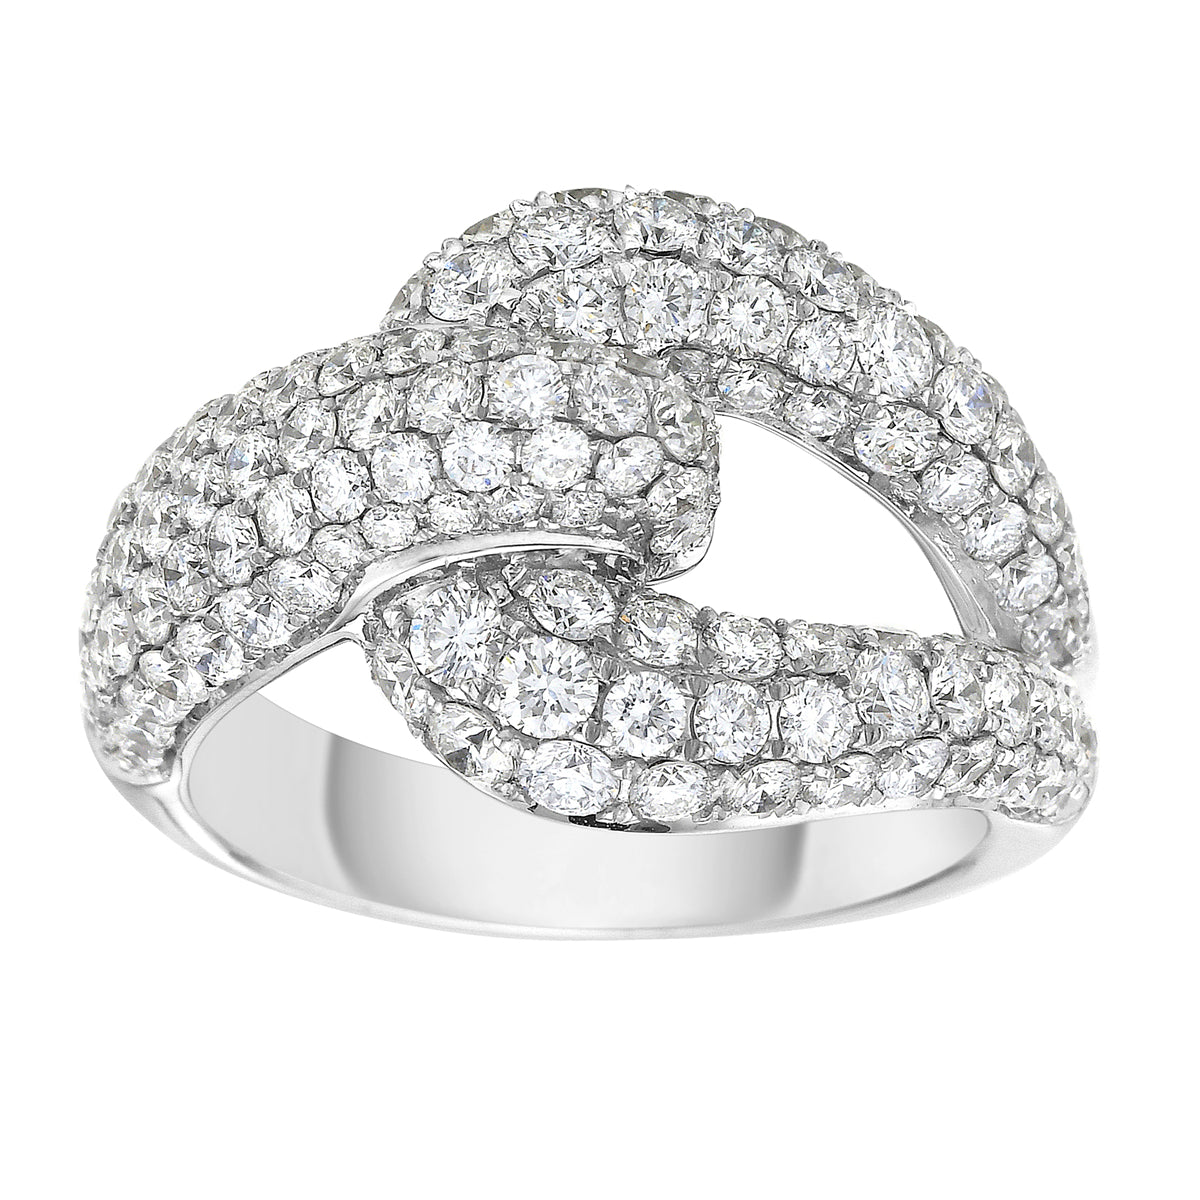 Ring 18KW/8.5G 138RD-2.45CT